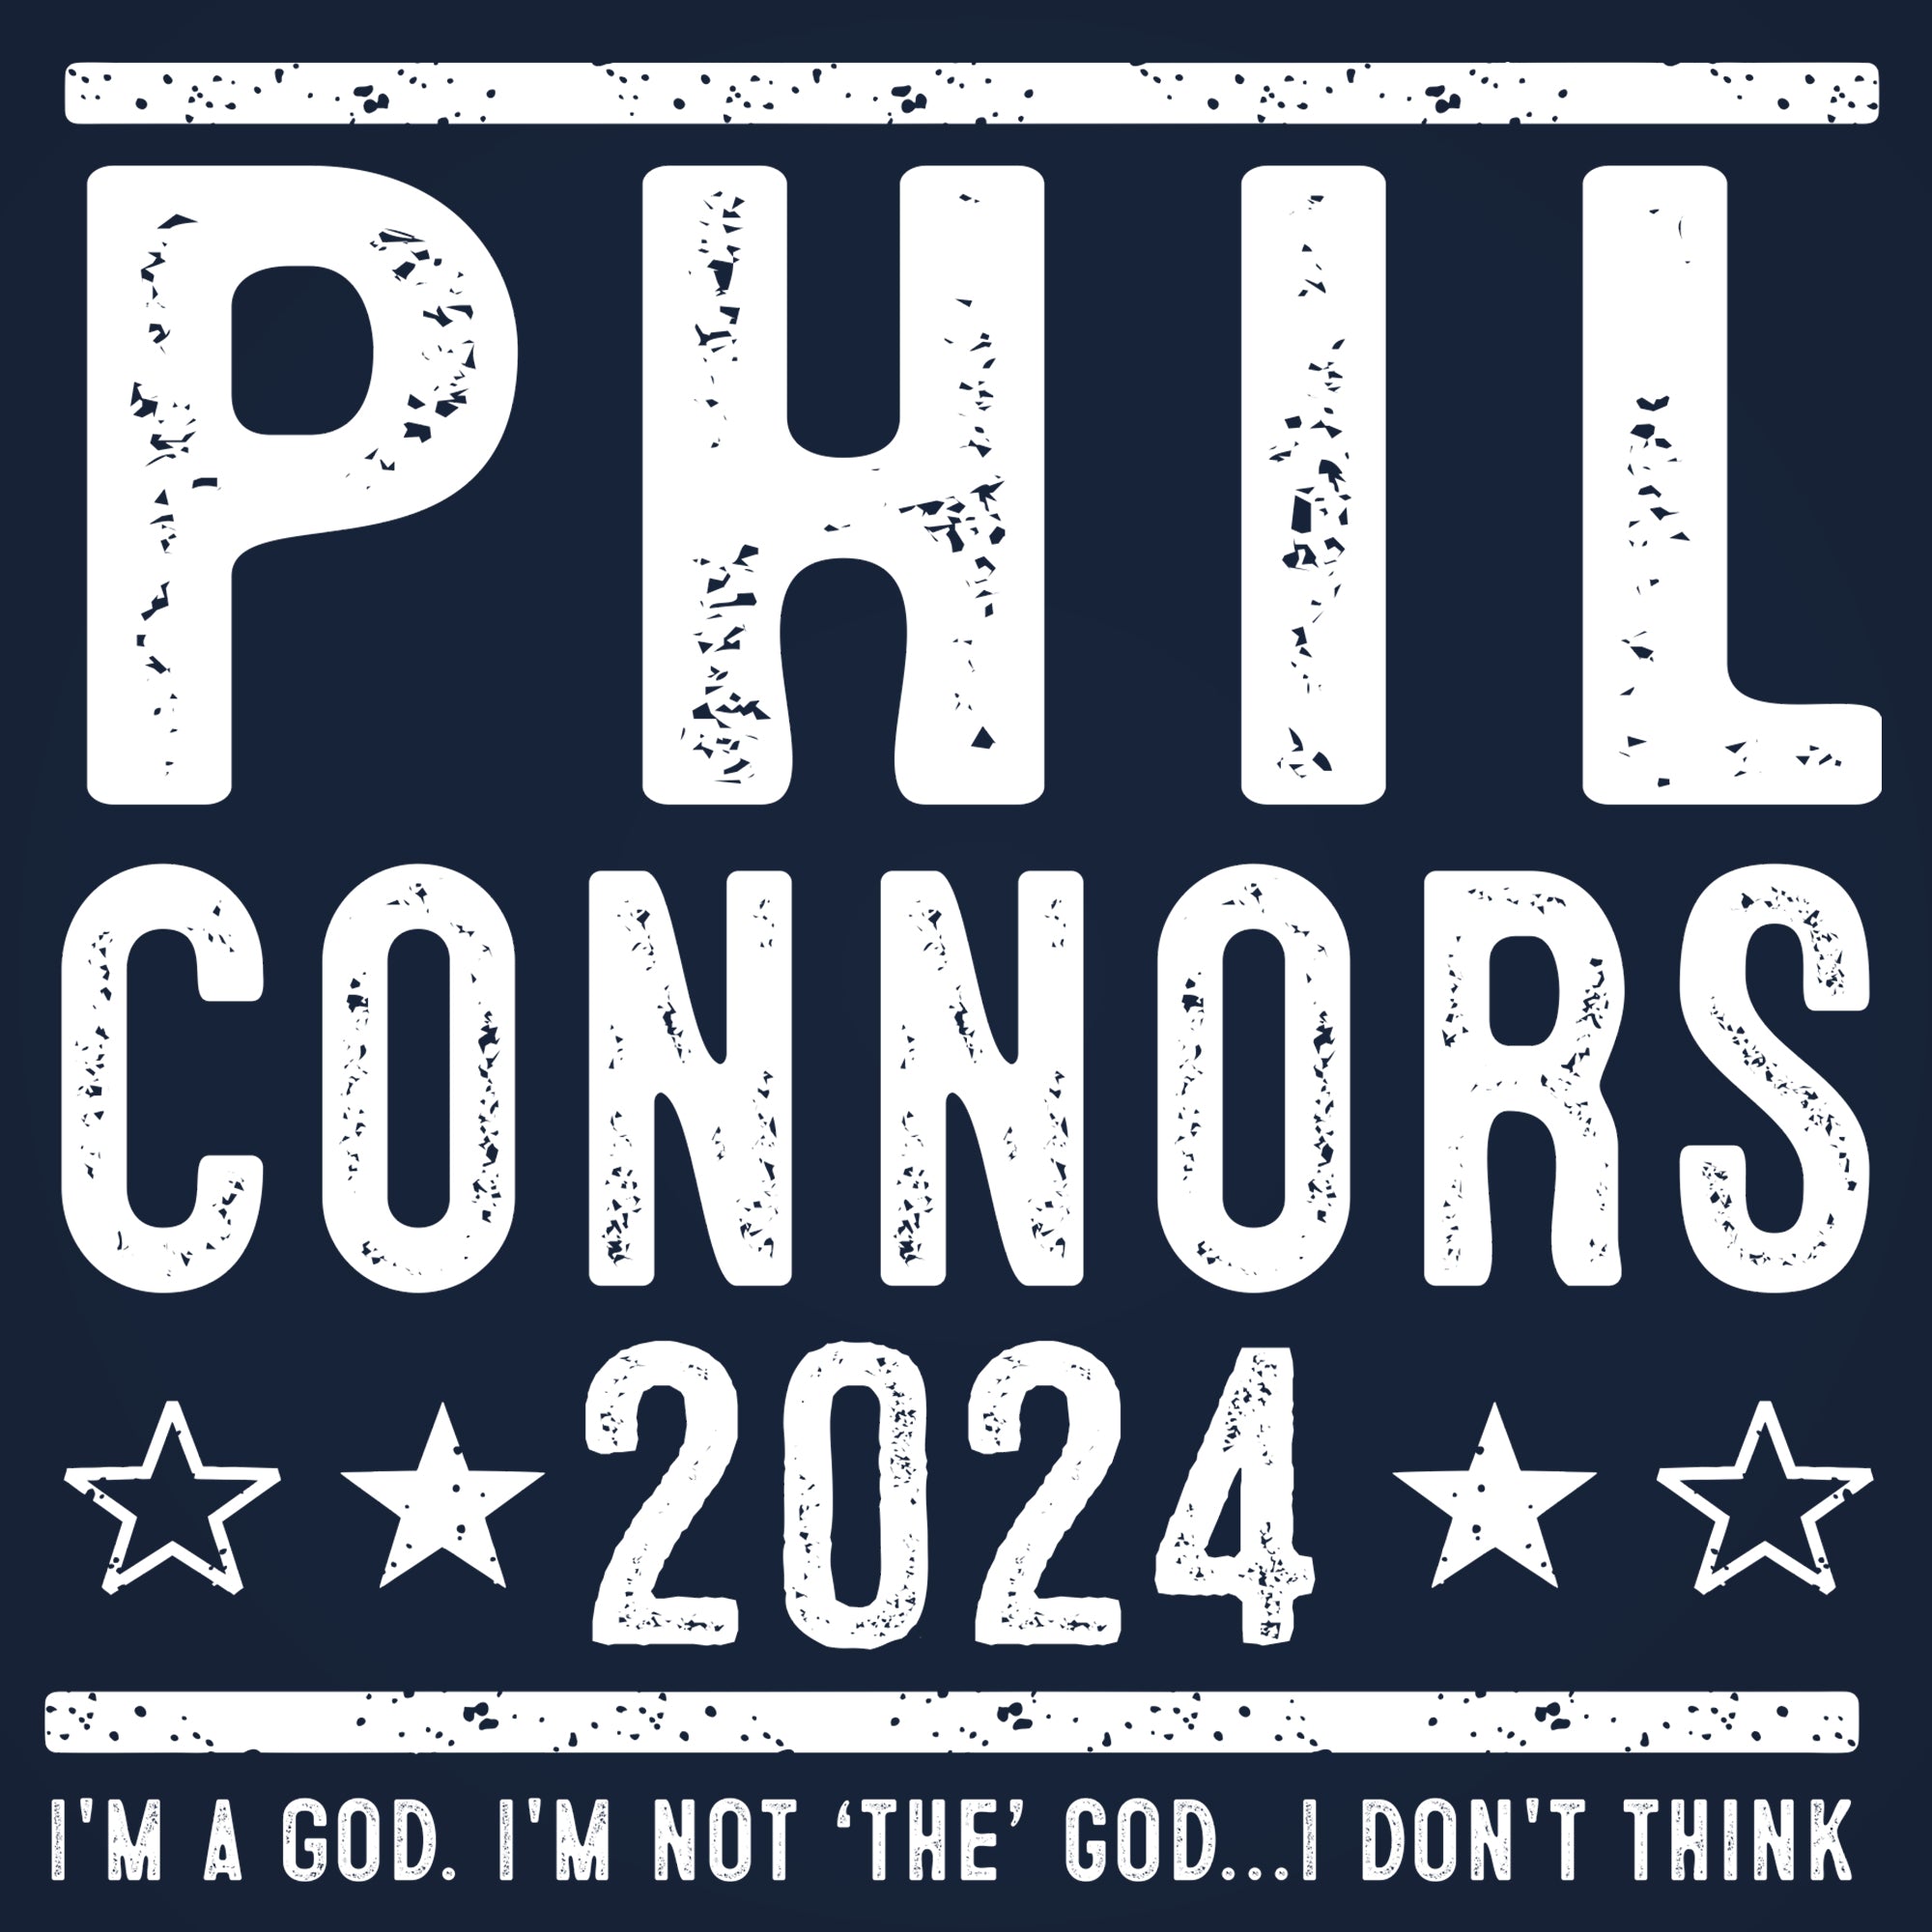 Phil Connors 2024 Election